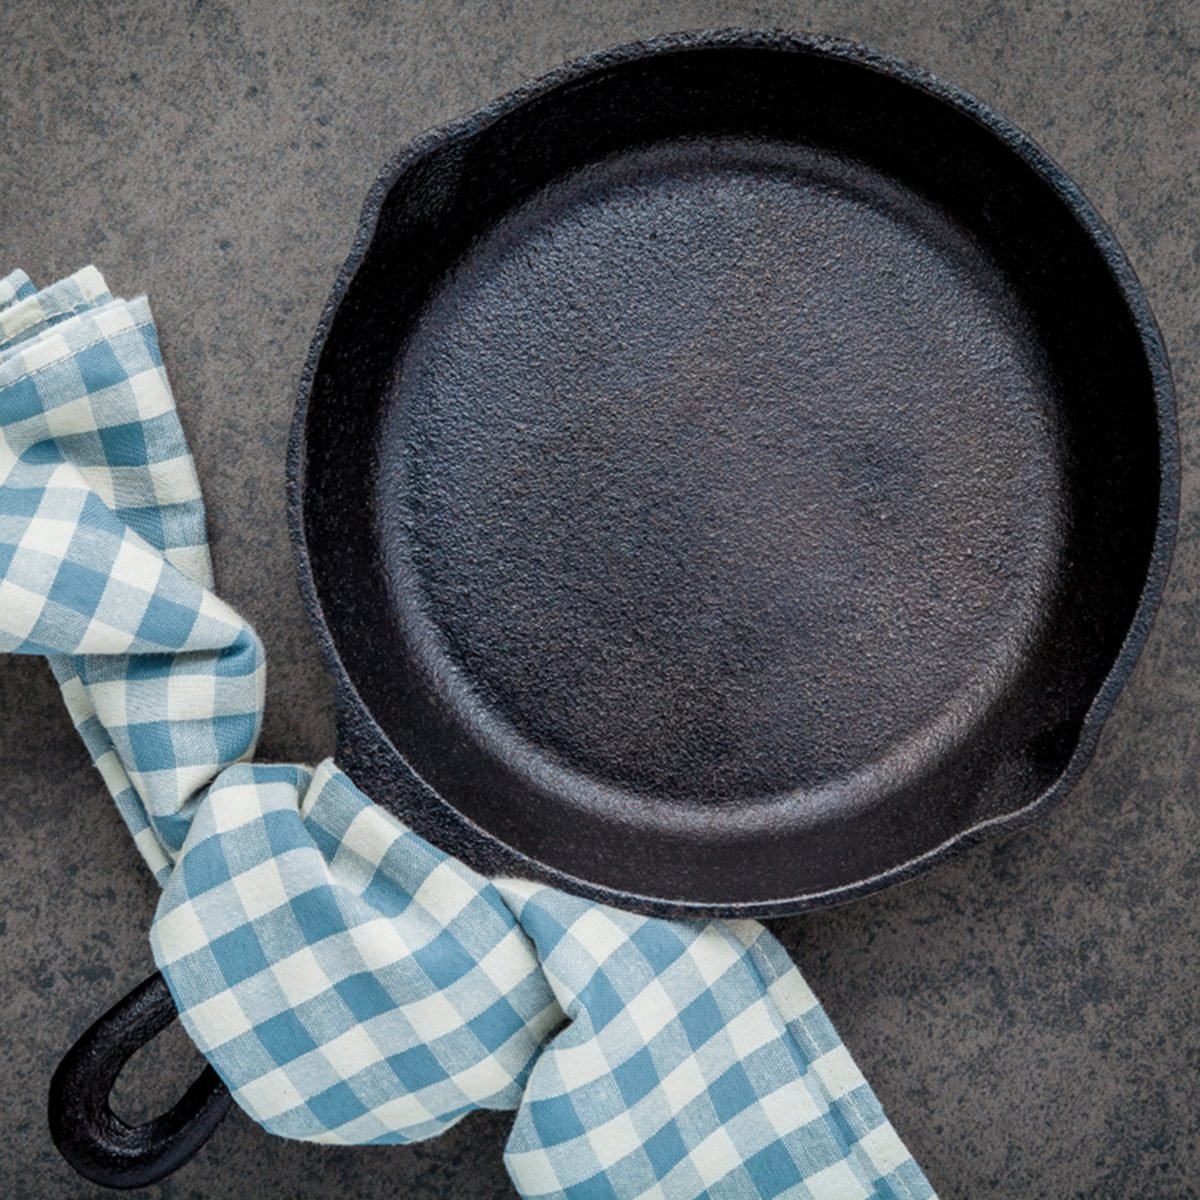 Smooth vs. Textured Cast Iron - Big Sister Knows